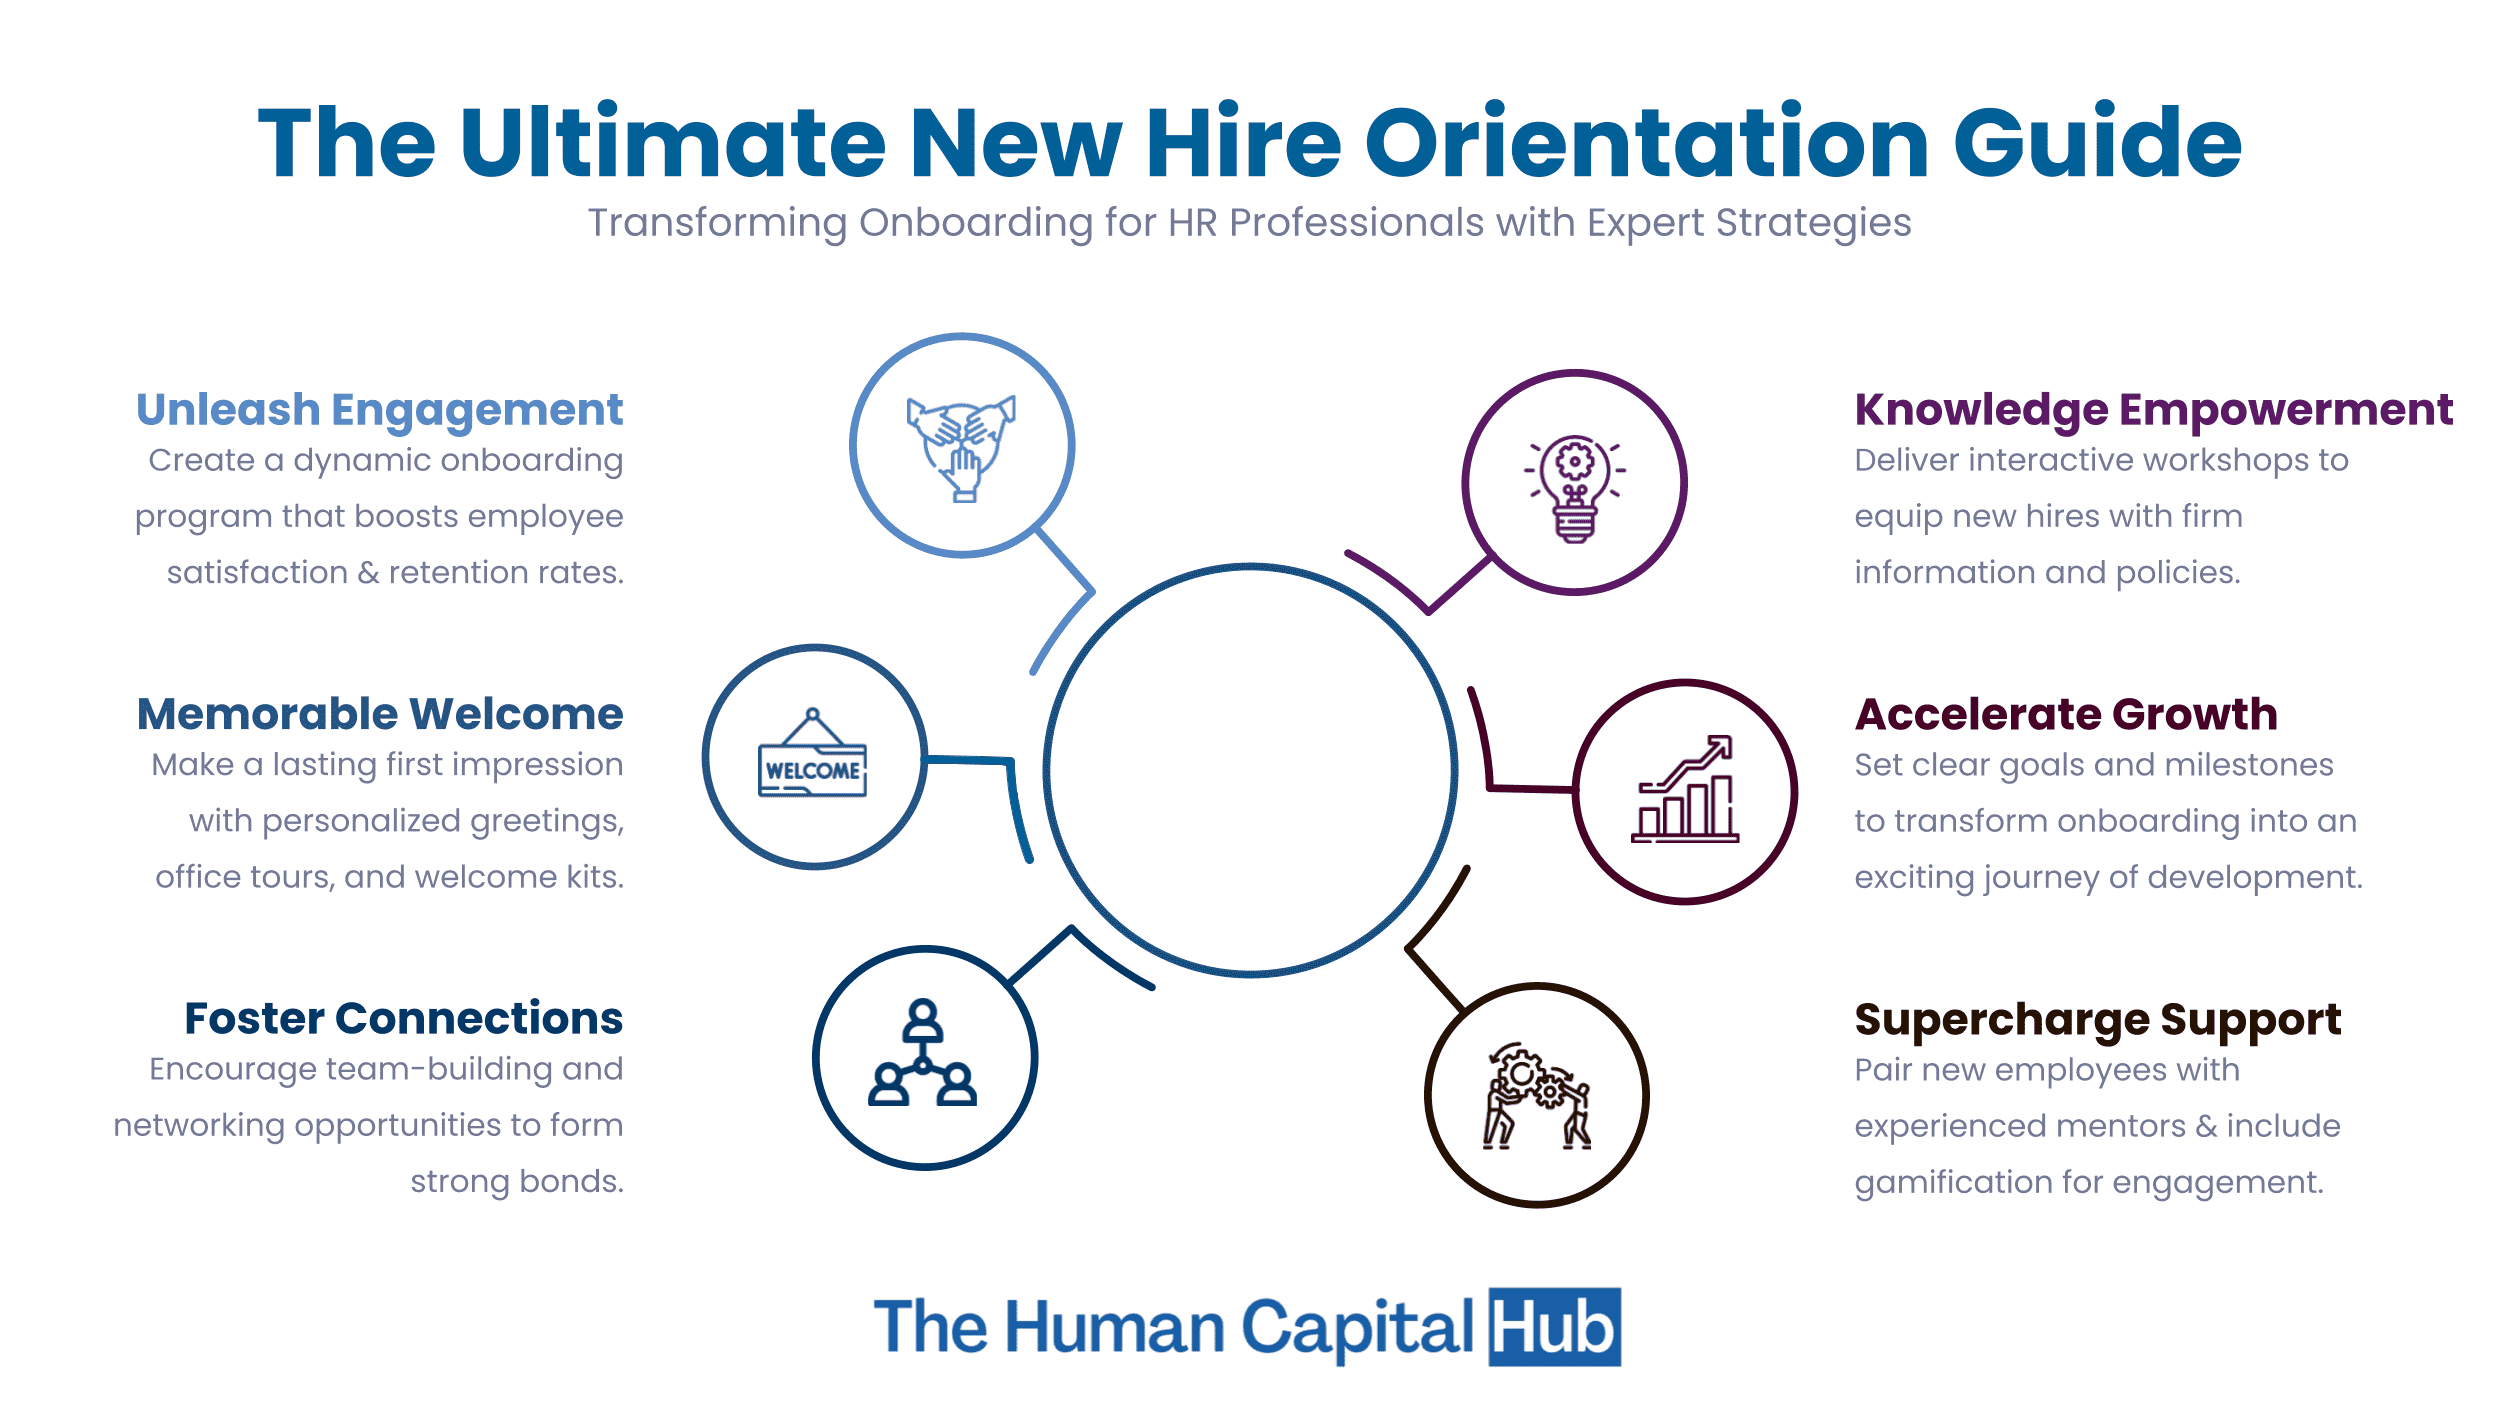 New Hire Orientation: A Guide for HR Professionals